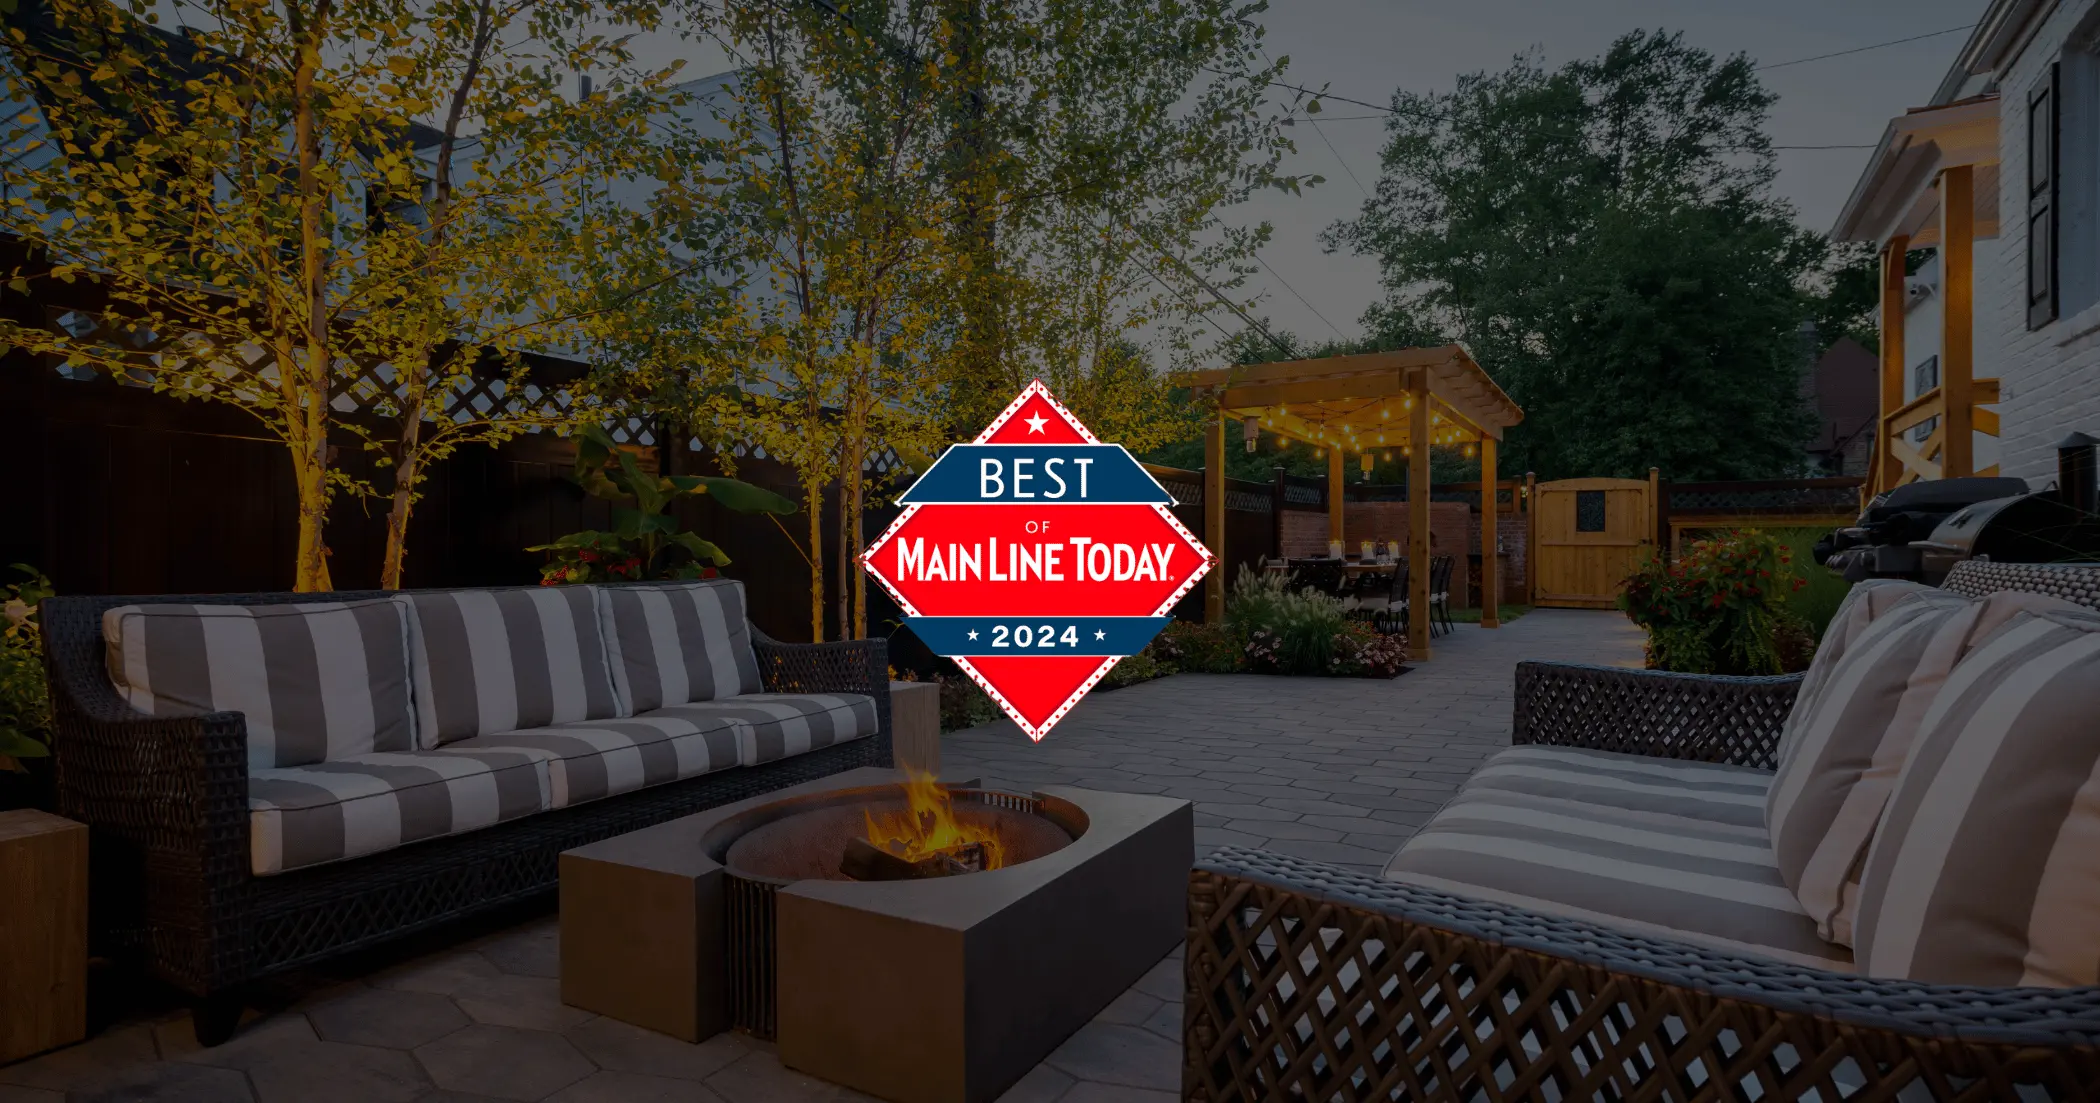 Terren Landscapes voted as Best of Main Line 2024